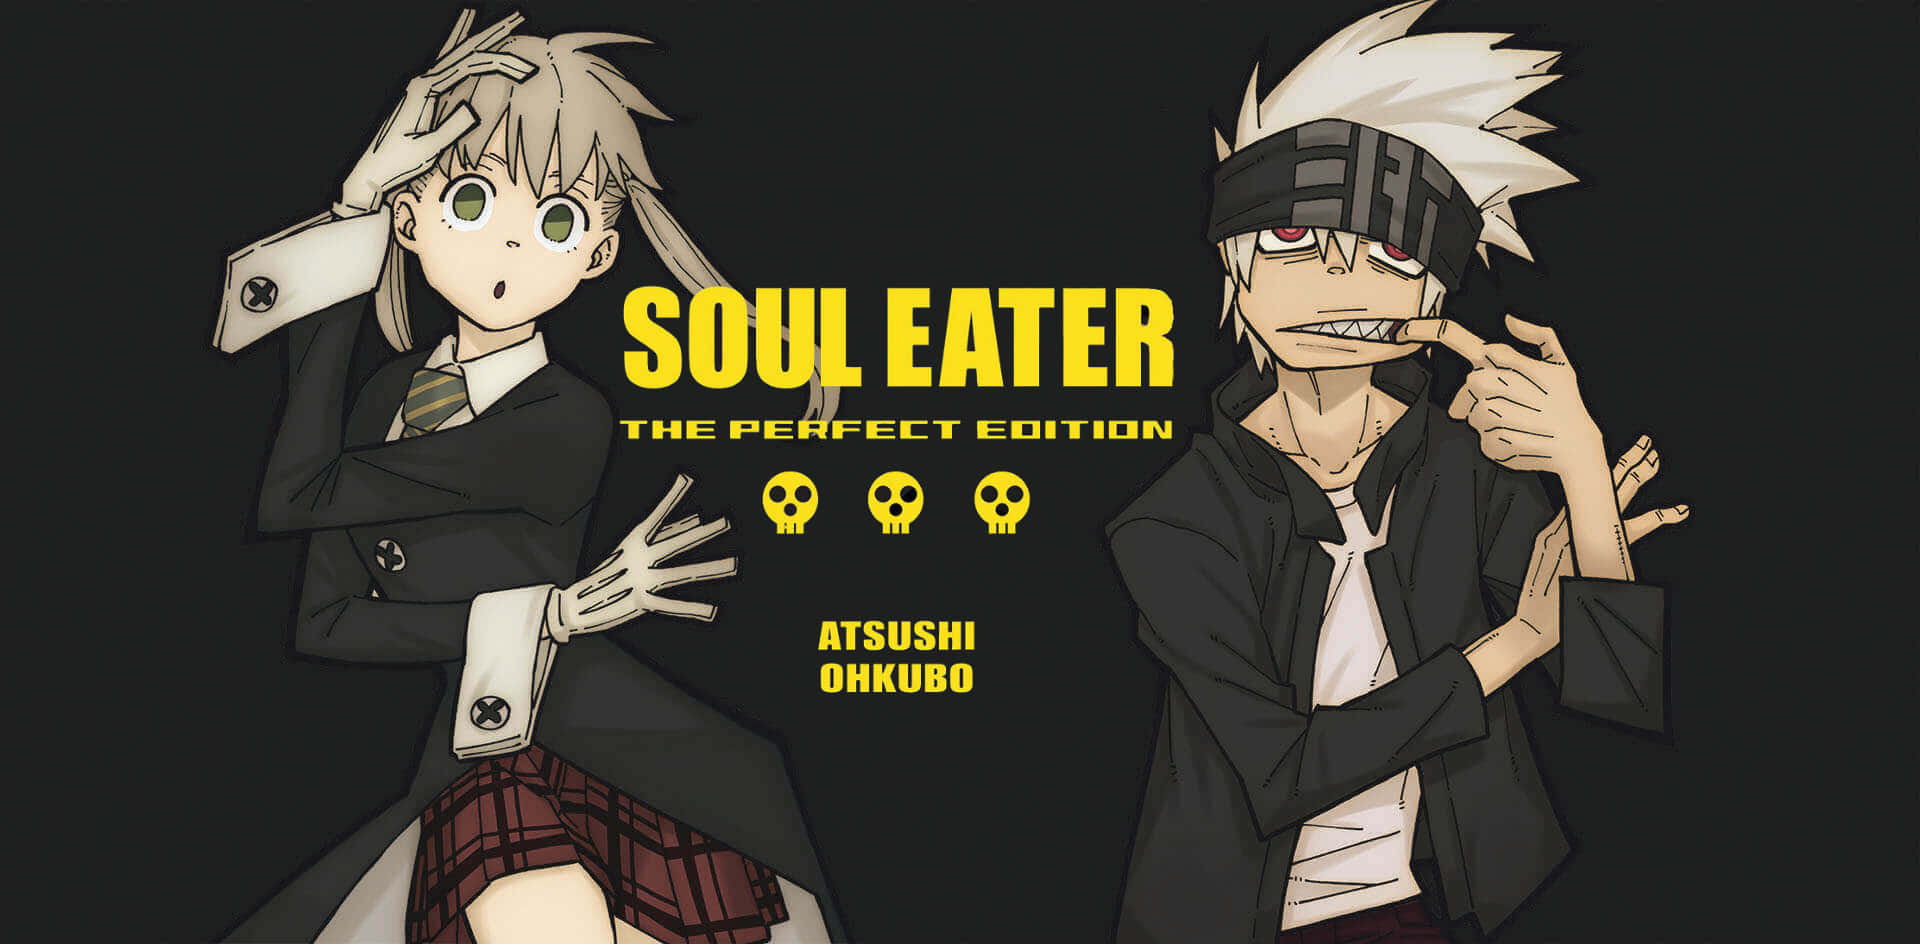 Soul Eater characters on an adventure.